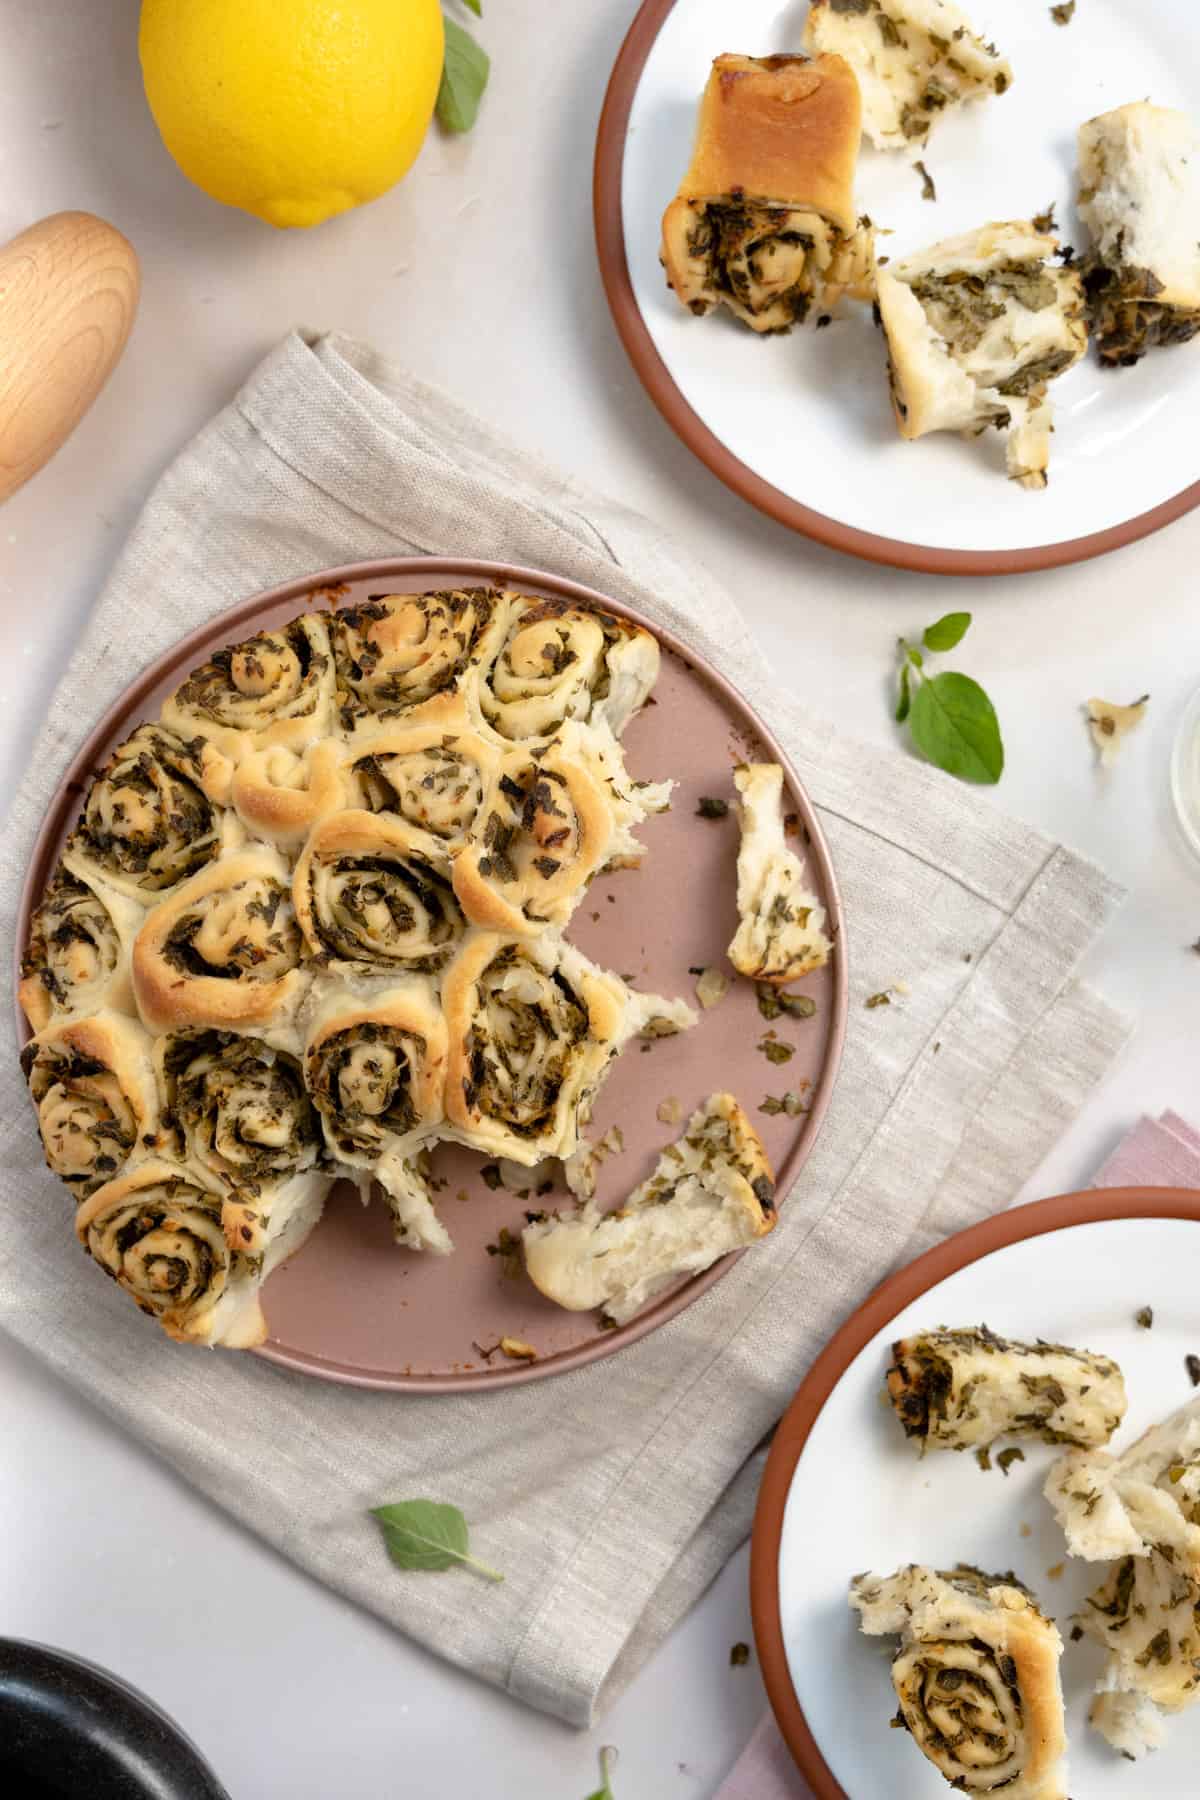 oregano bread pulled apart on a pink tray